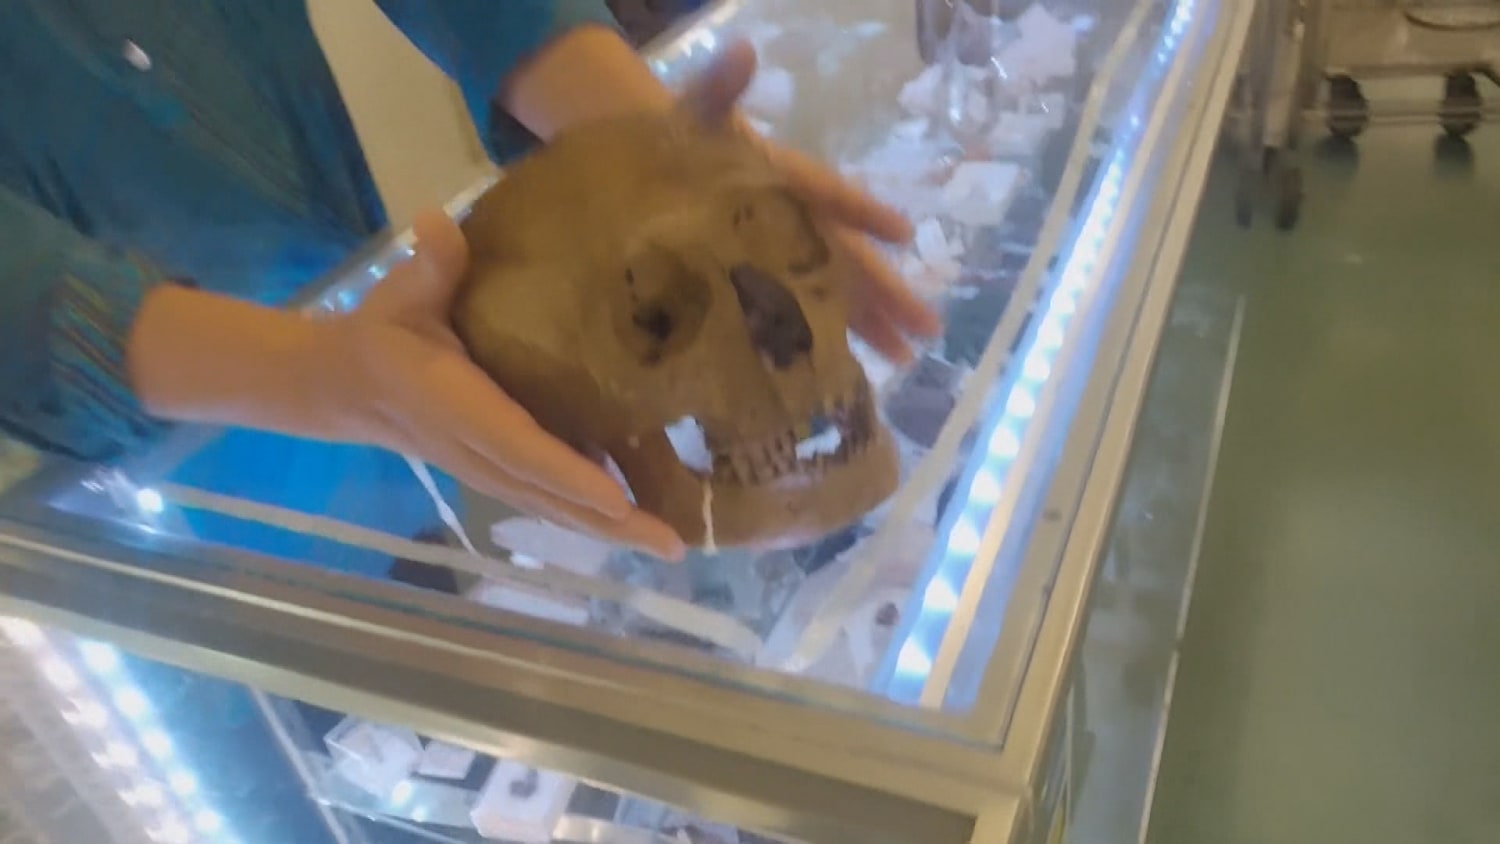 Anthropologist discovers human skull in Florida thrift store